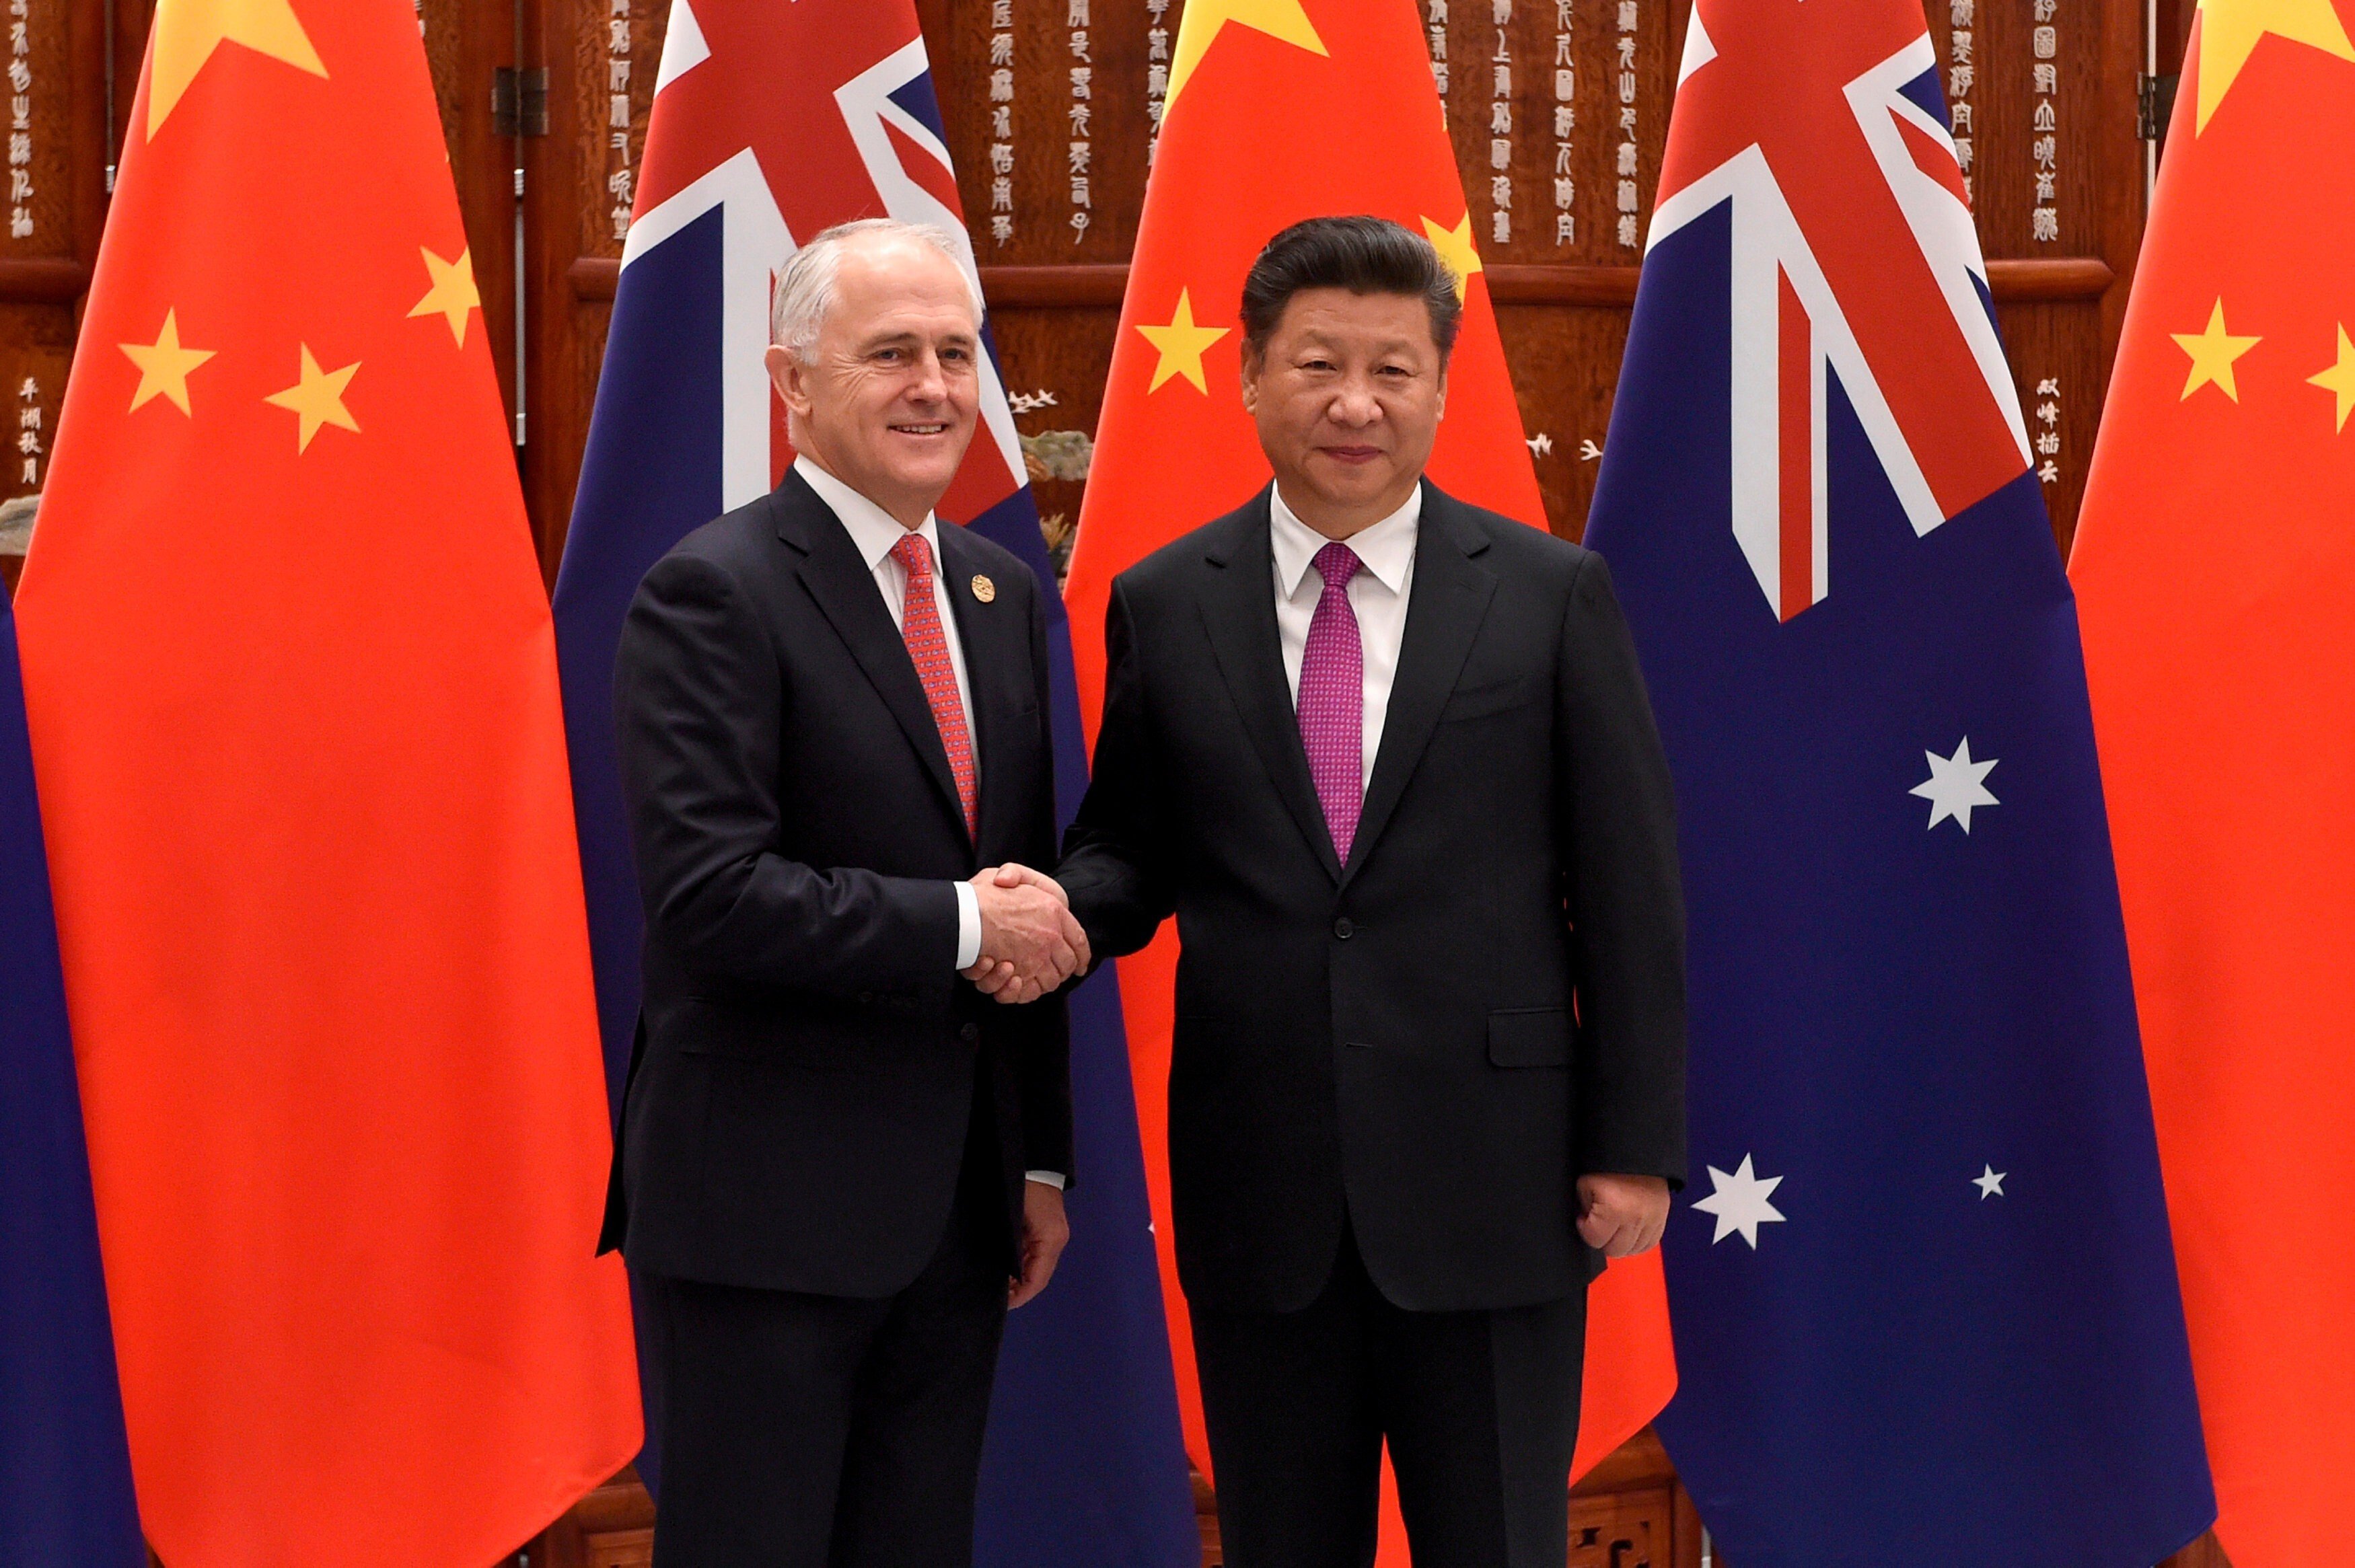 Former Australian prime minister Malcolm Turnbull shakes hands with Chinese President Xi Jinping ahead of a G20 Summit in Hangzhou in 2016. Turnbull said Xi had ‘changed’. Photo: Reuters